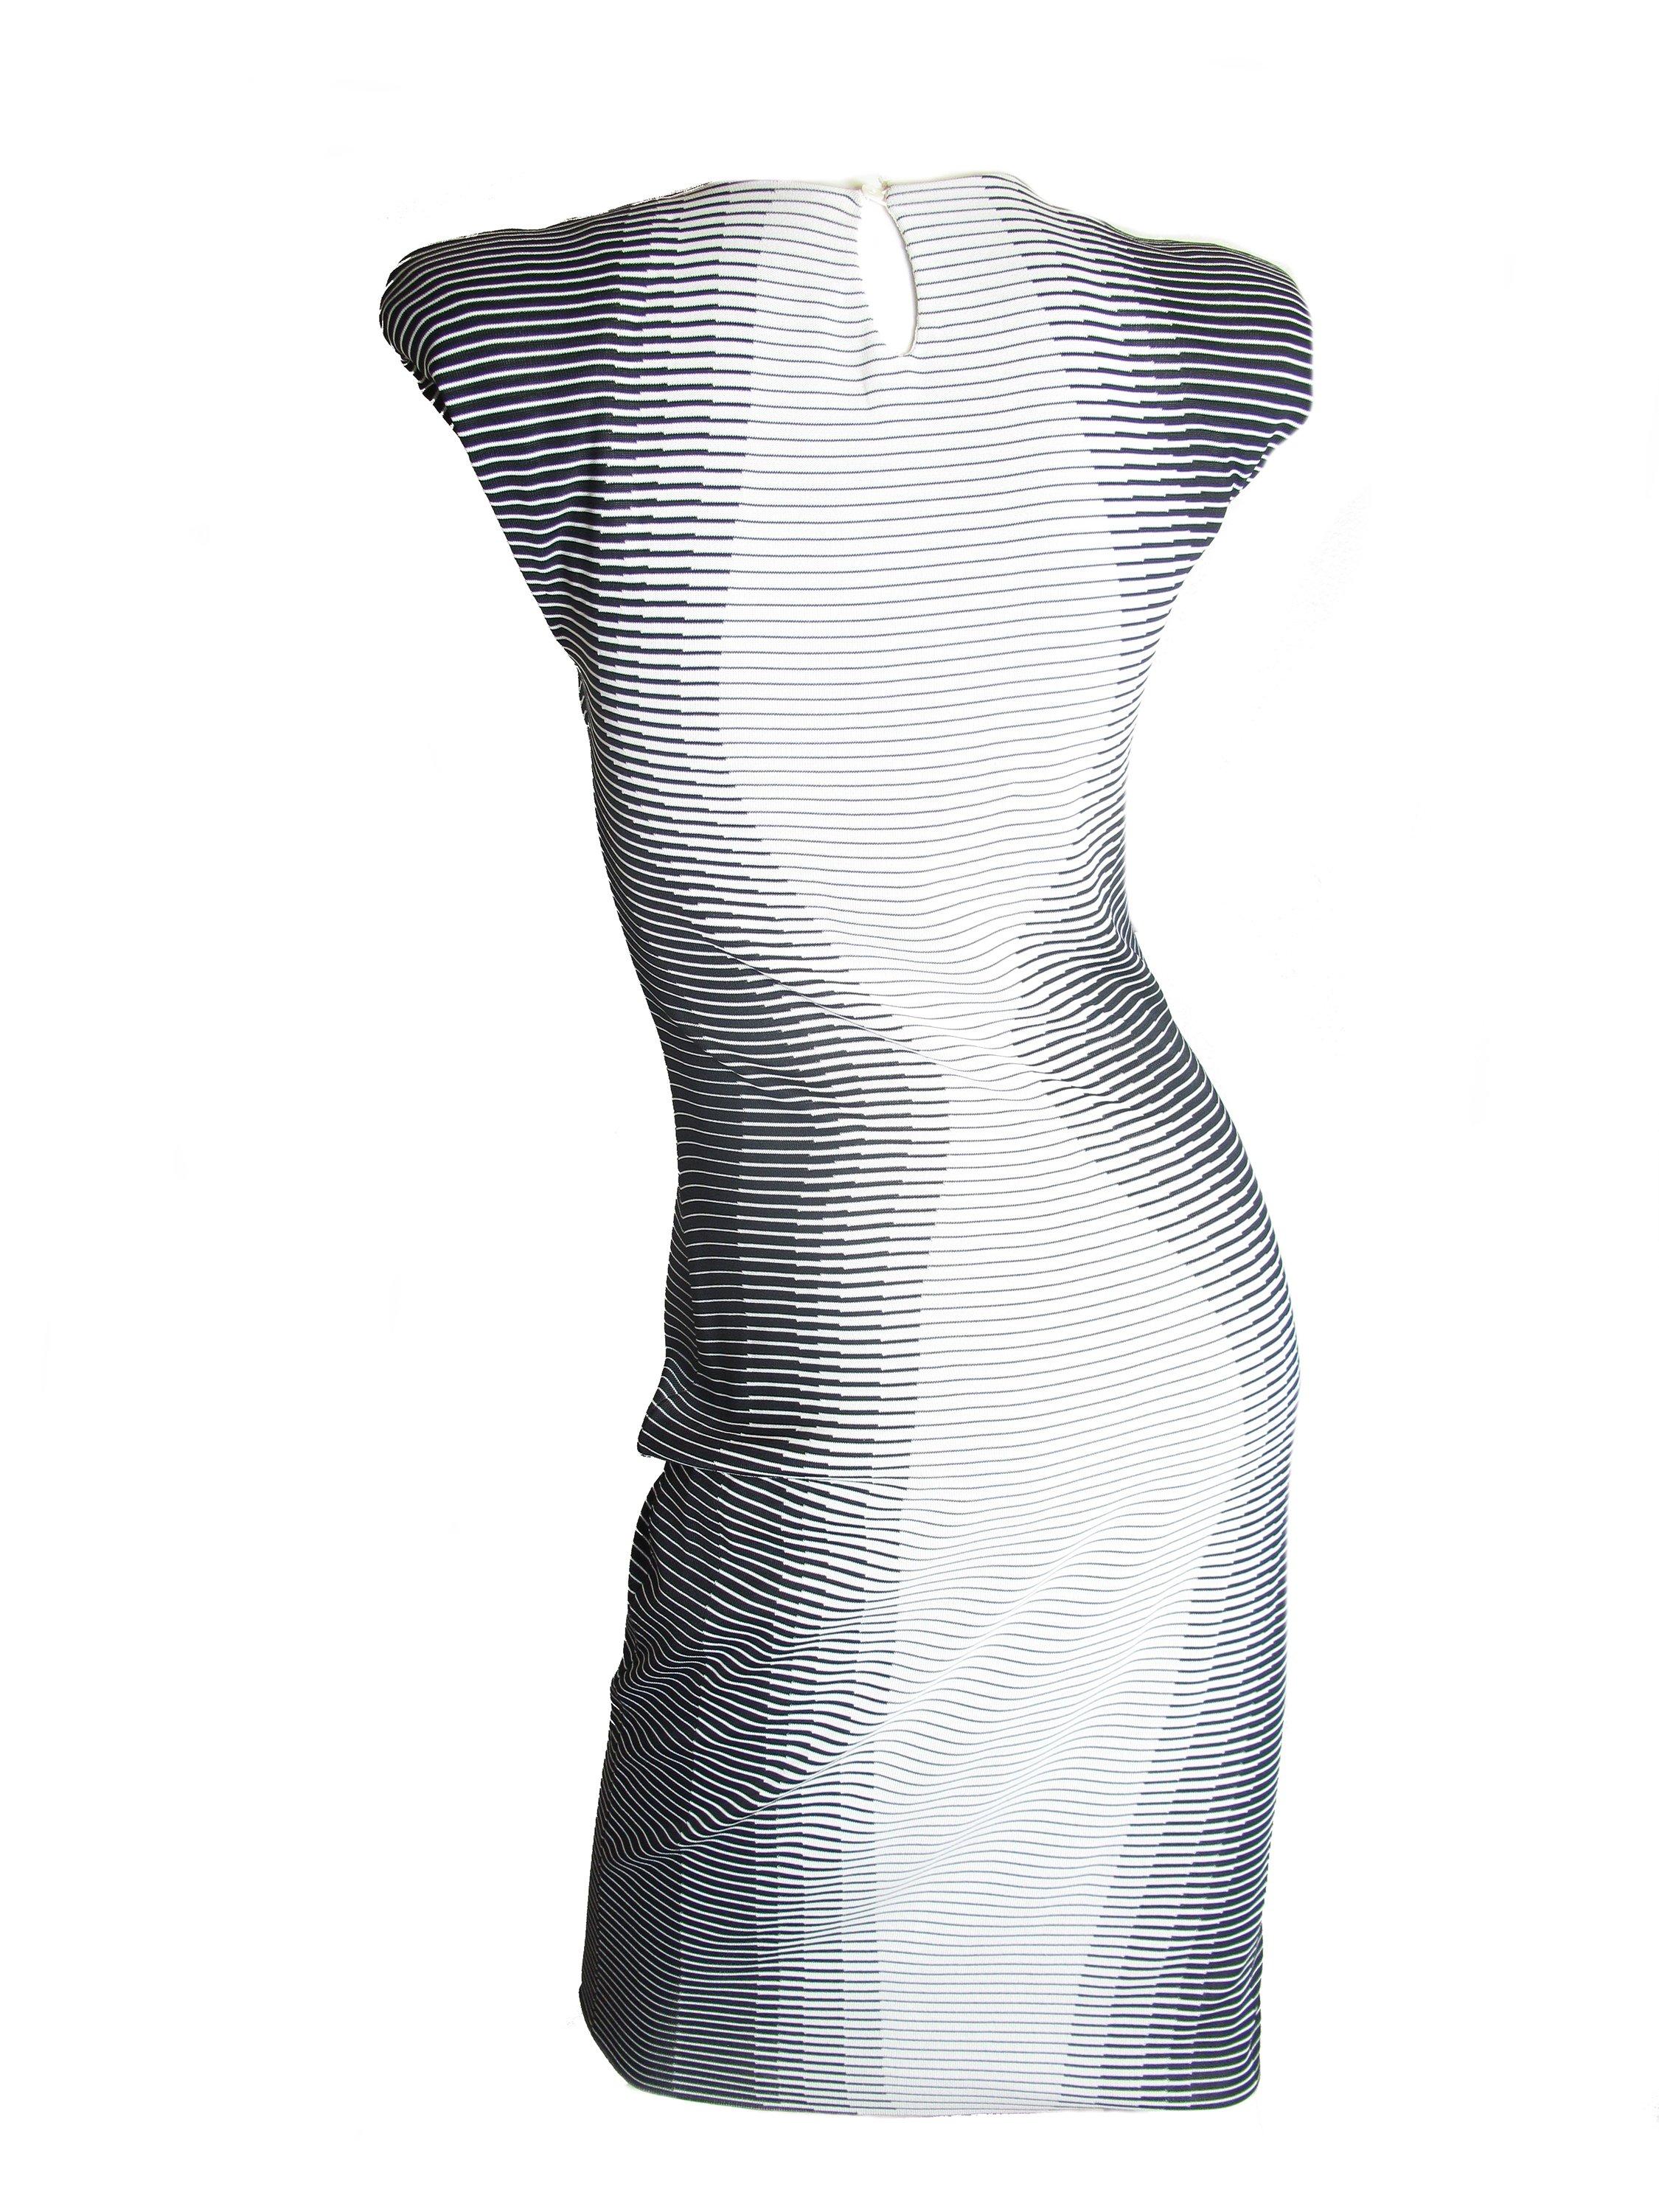 Early Alexander McQueen 2009 Optical Illusion Black White Runway Midi Dress For Sale 5